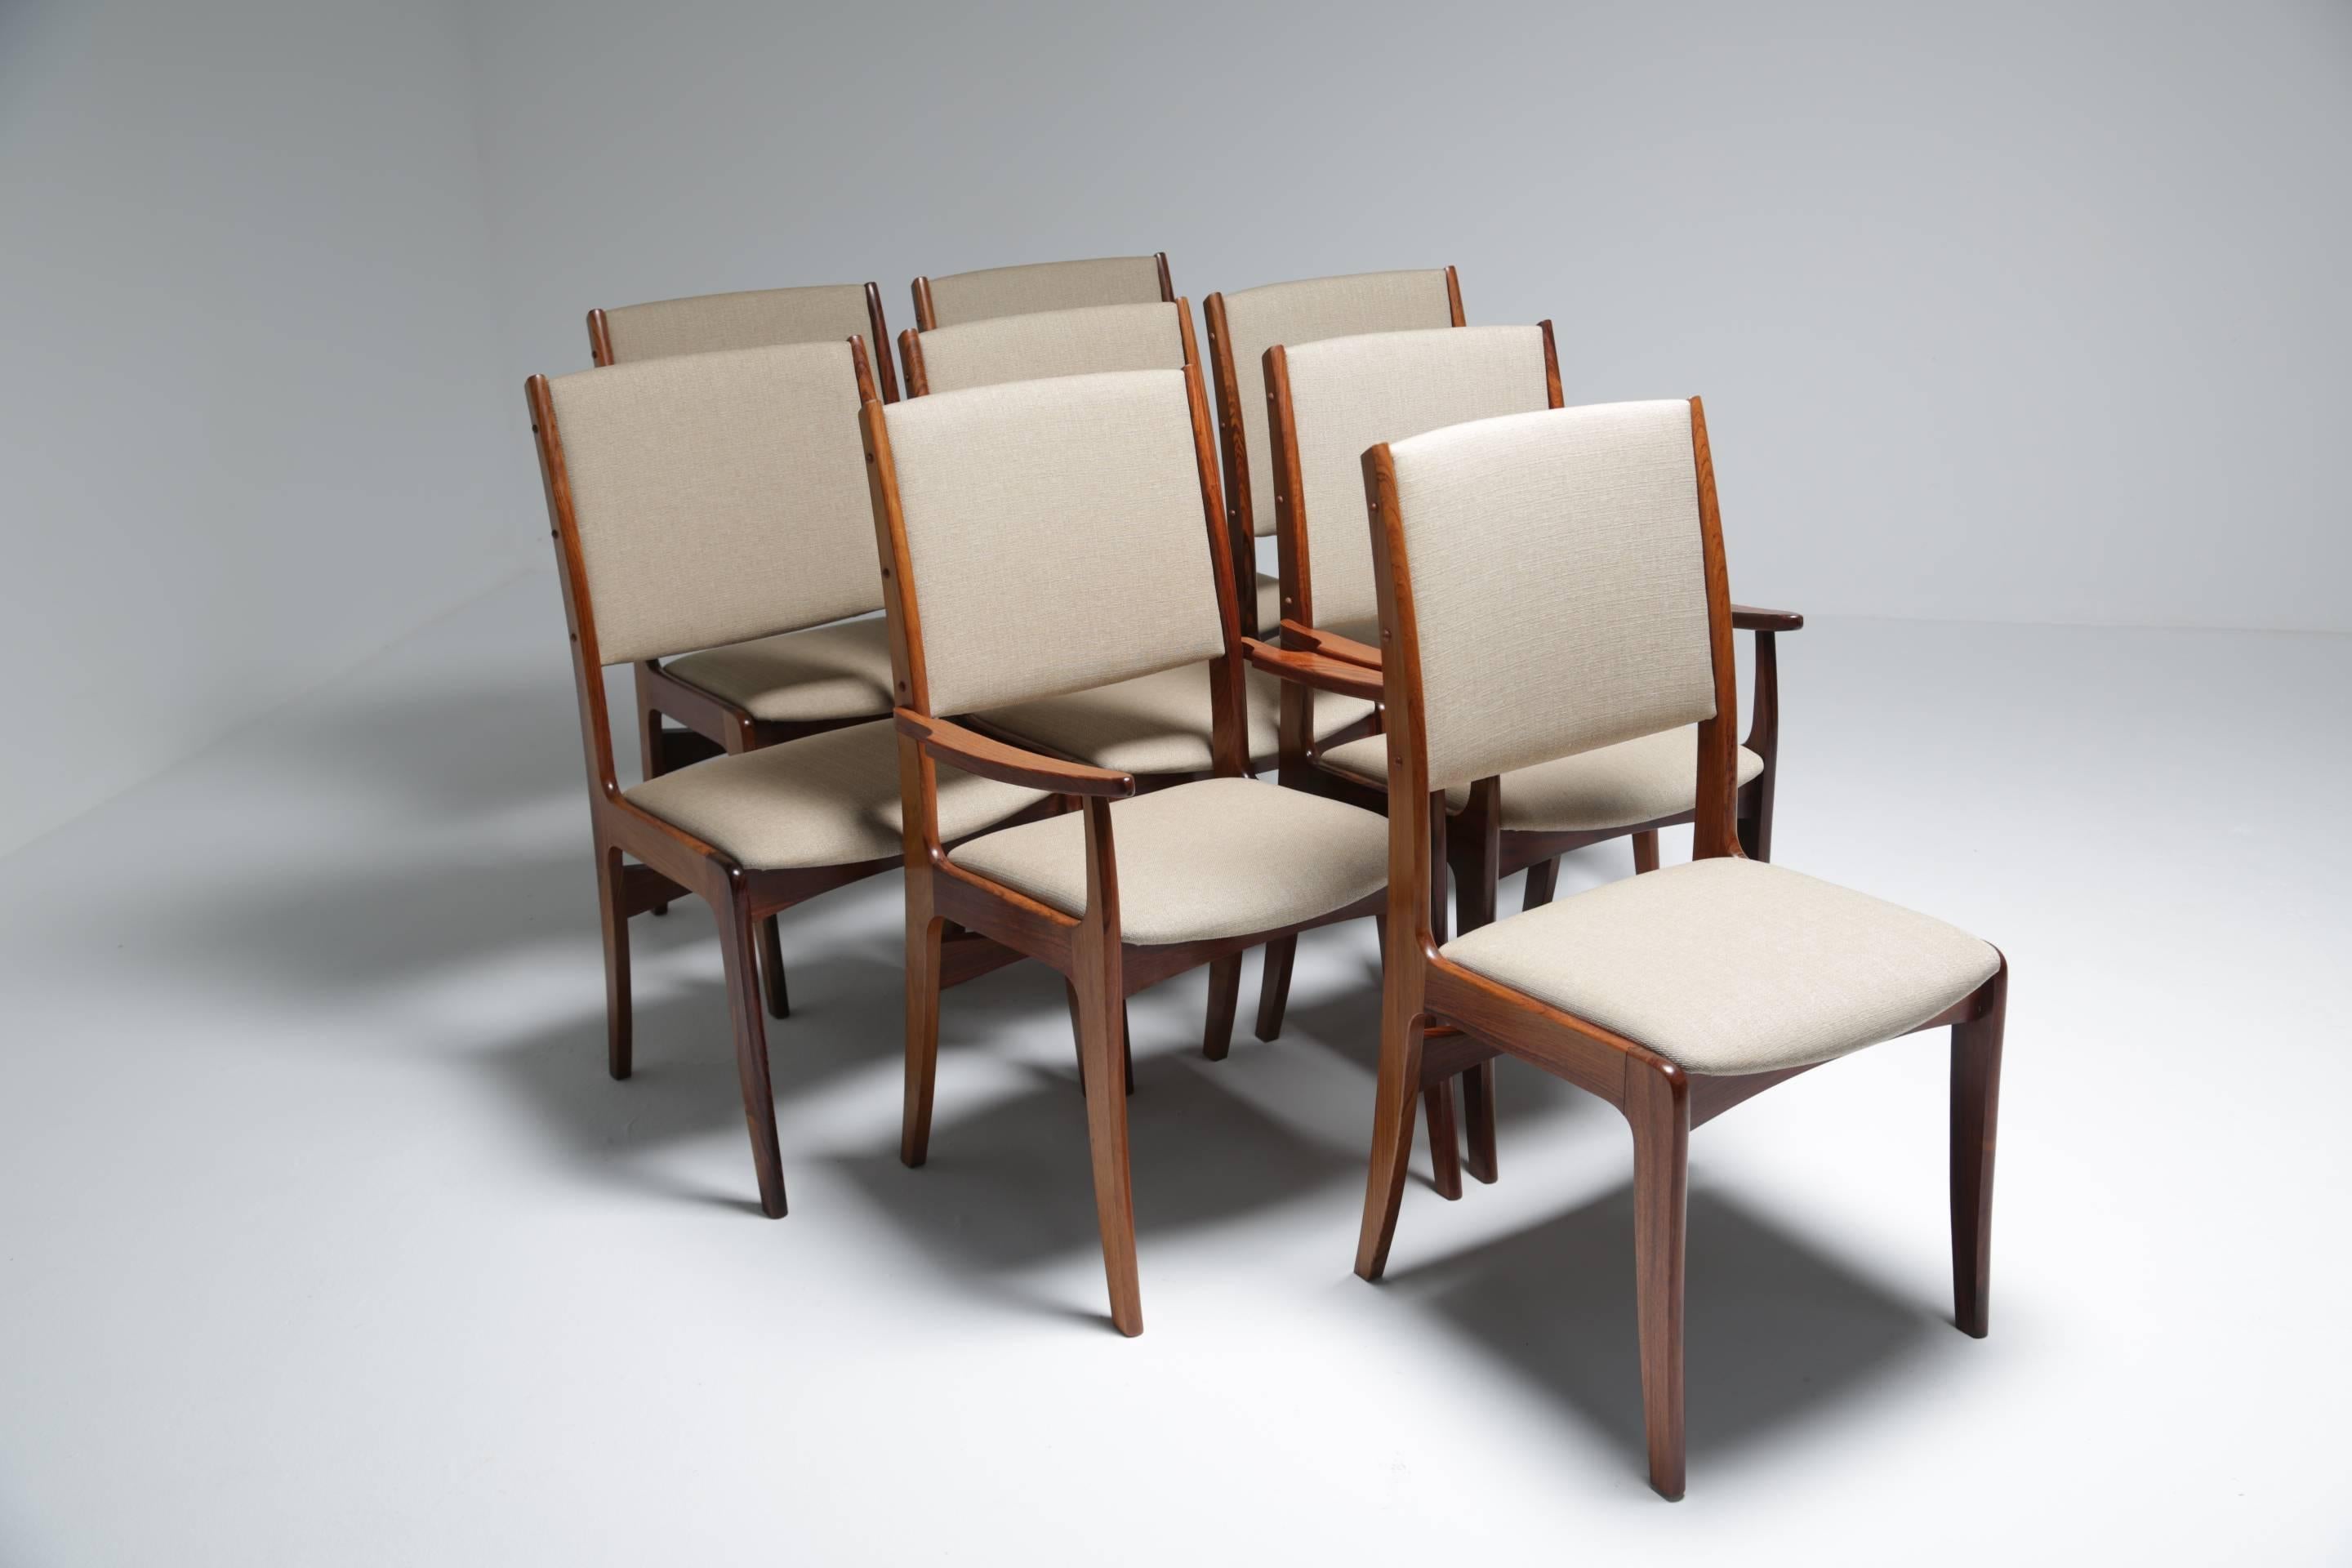 A beautiful set of eight dining chairs by renowned Danish maker Johannes Andersen for Udlum Mobelfabrik. This stunning mid-century set of chairs includes six side chairs and two carvers. All are in good vintage condition with new high quality